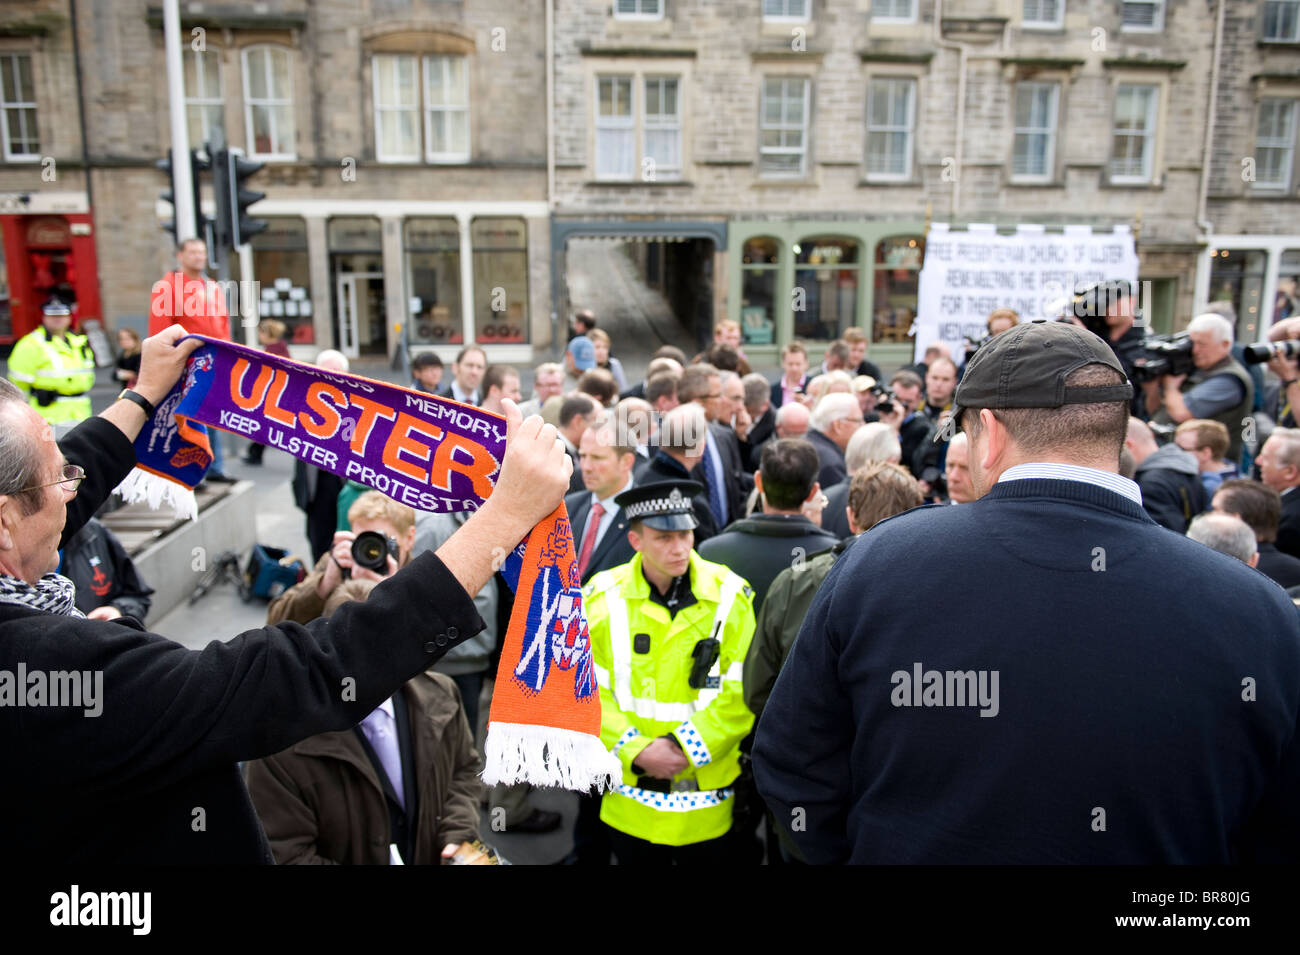 Man holding scarf with Protestant slogan as Ian Paisley addresses crowd in Edinburgh's Grassmarket on the day of the Papal visit Stock Photo